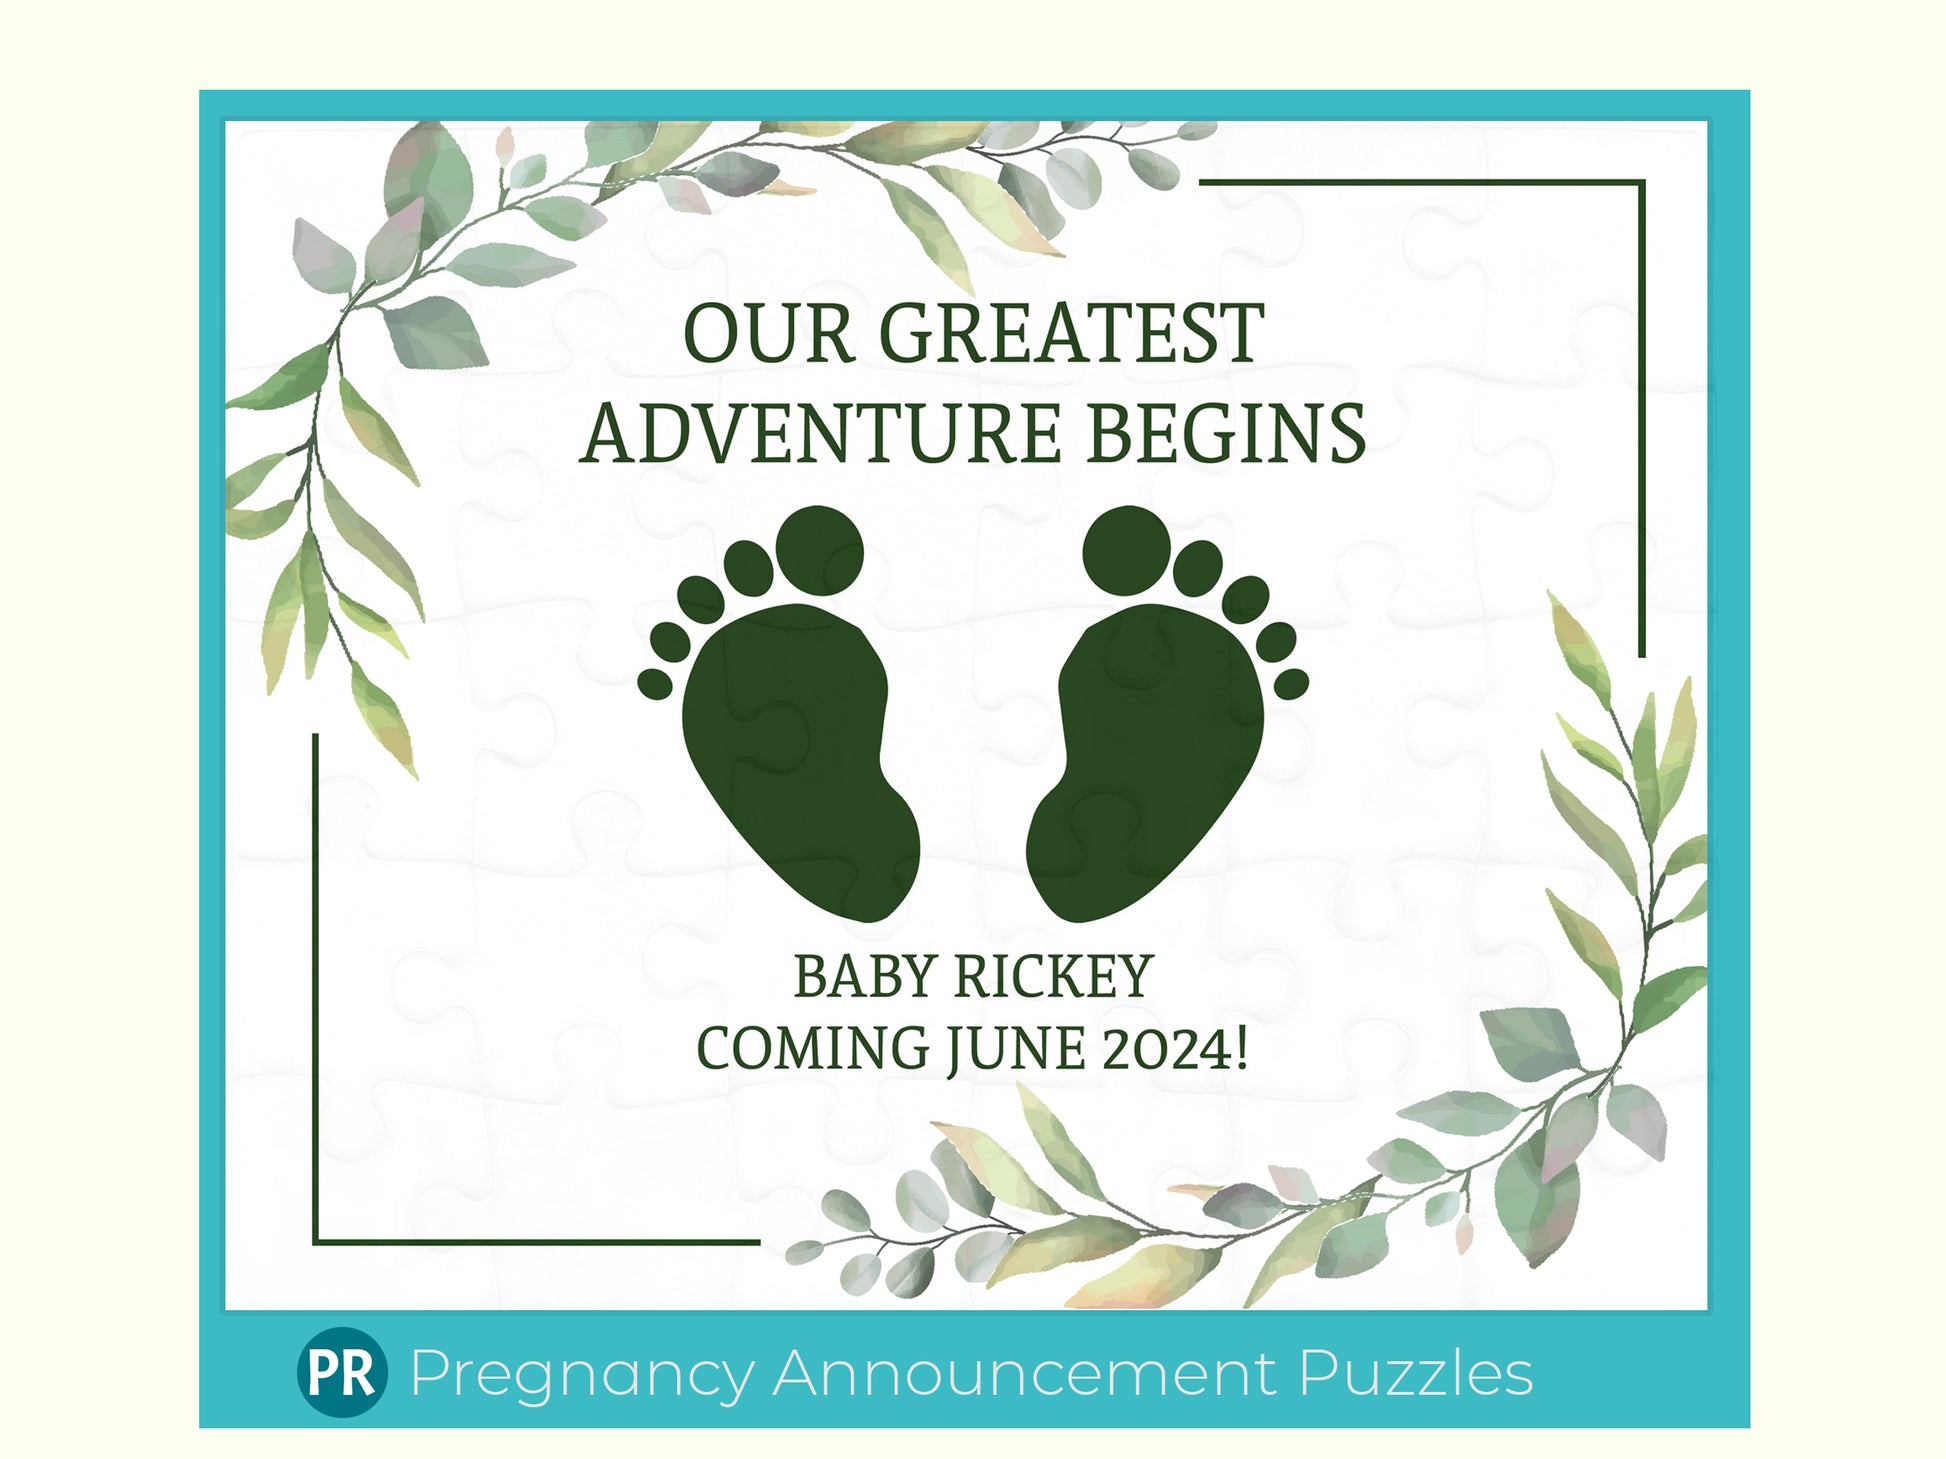 Baby is coming jigsaw puzzle announcement. Gift to give to grandparents or family members. Puzzle has a nature leaves background with baby feet in middle and a custom message about baby's name and when expected to arrive.